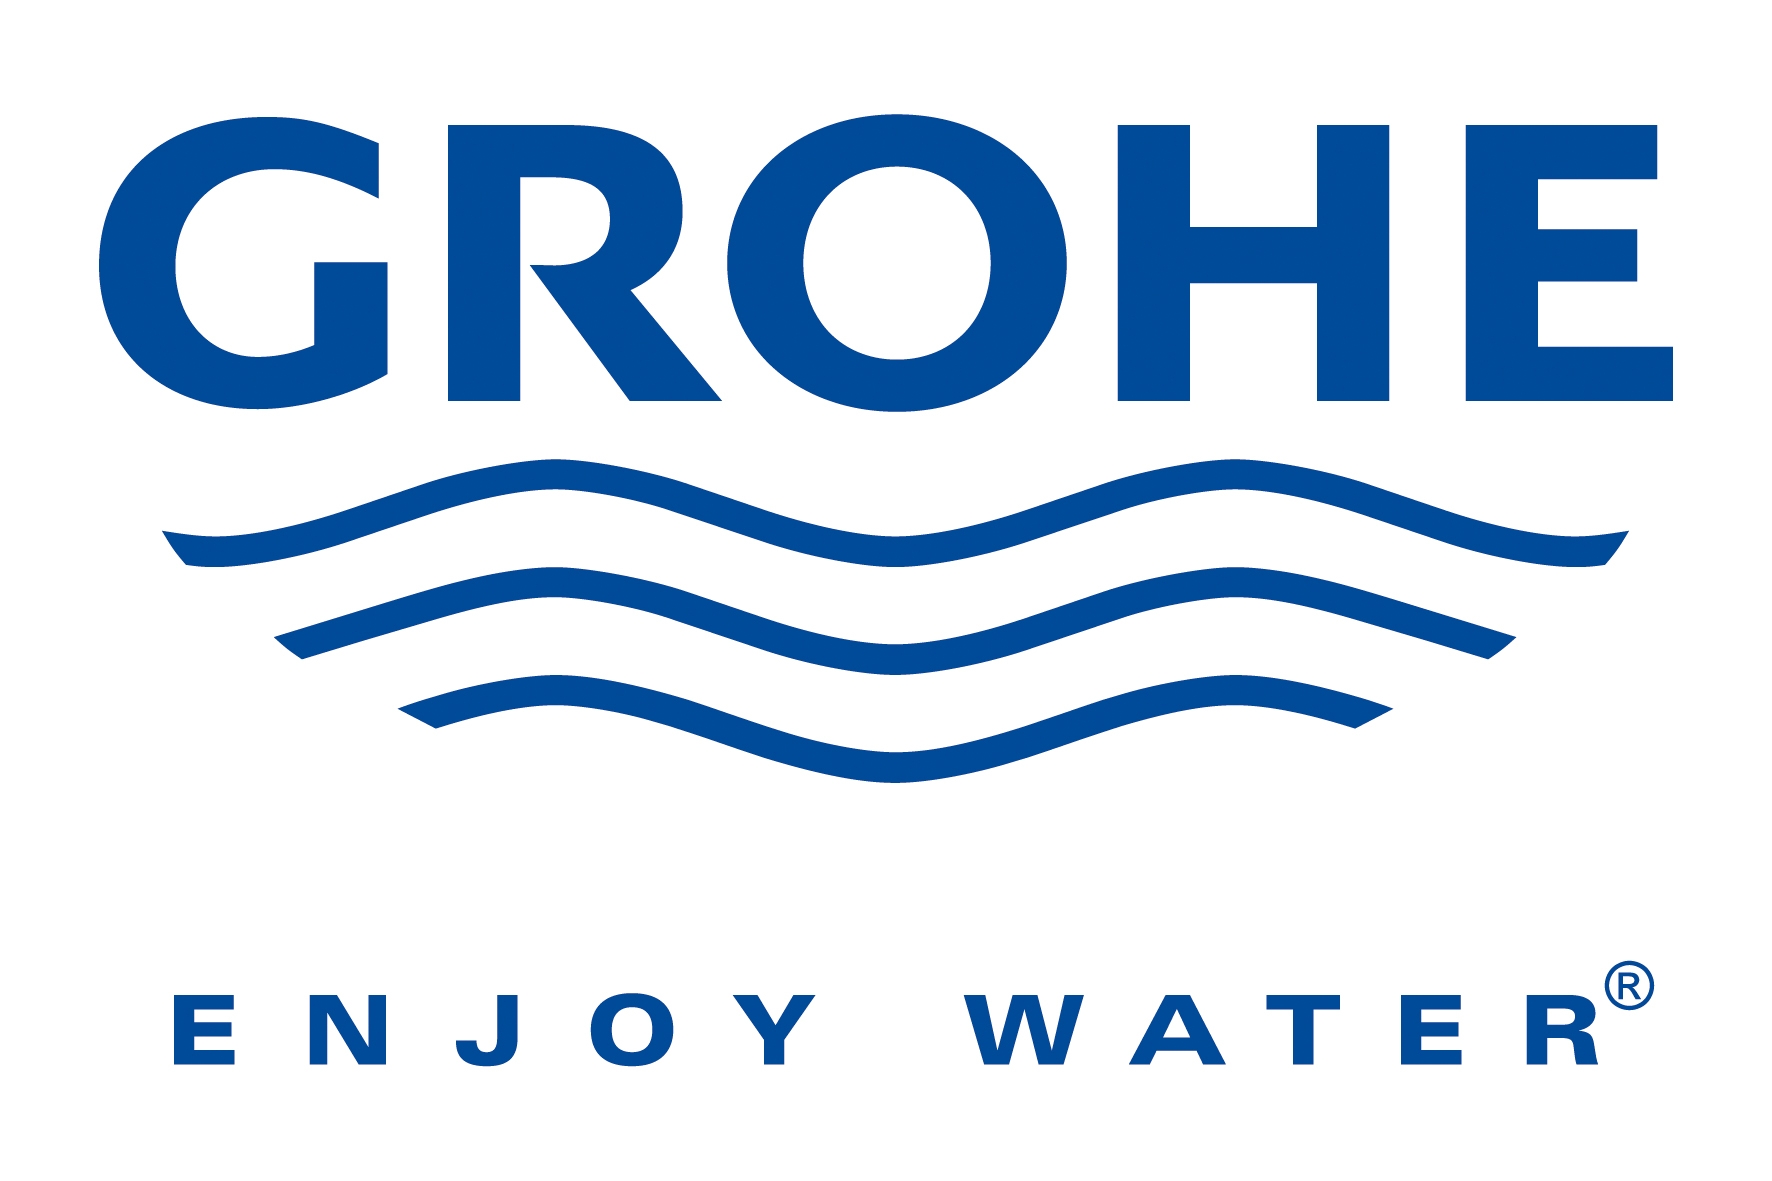 GROHE - Enjoy water